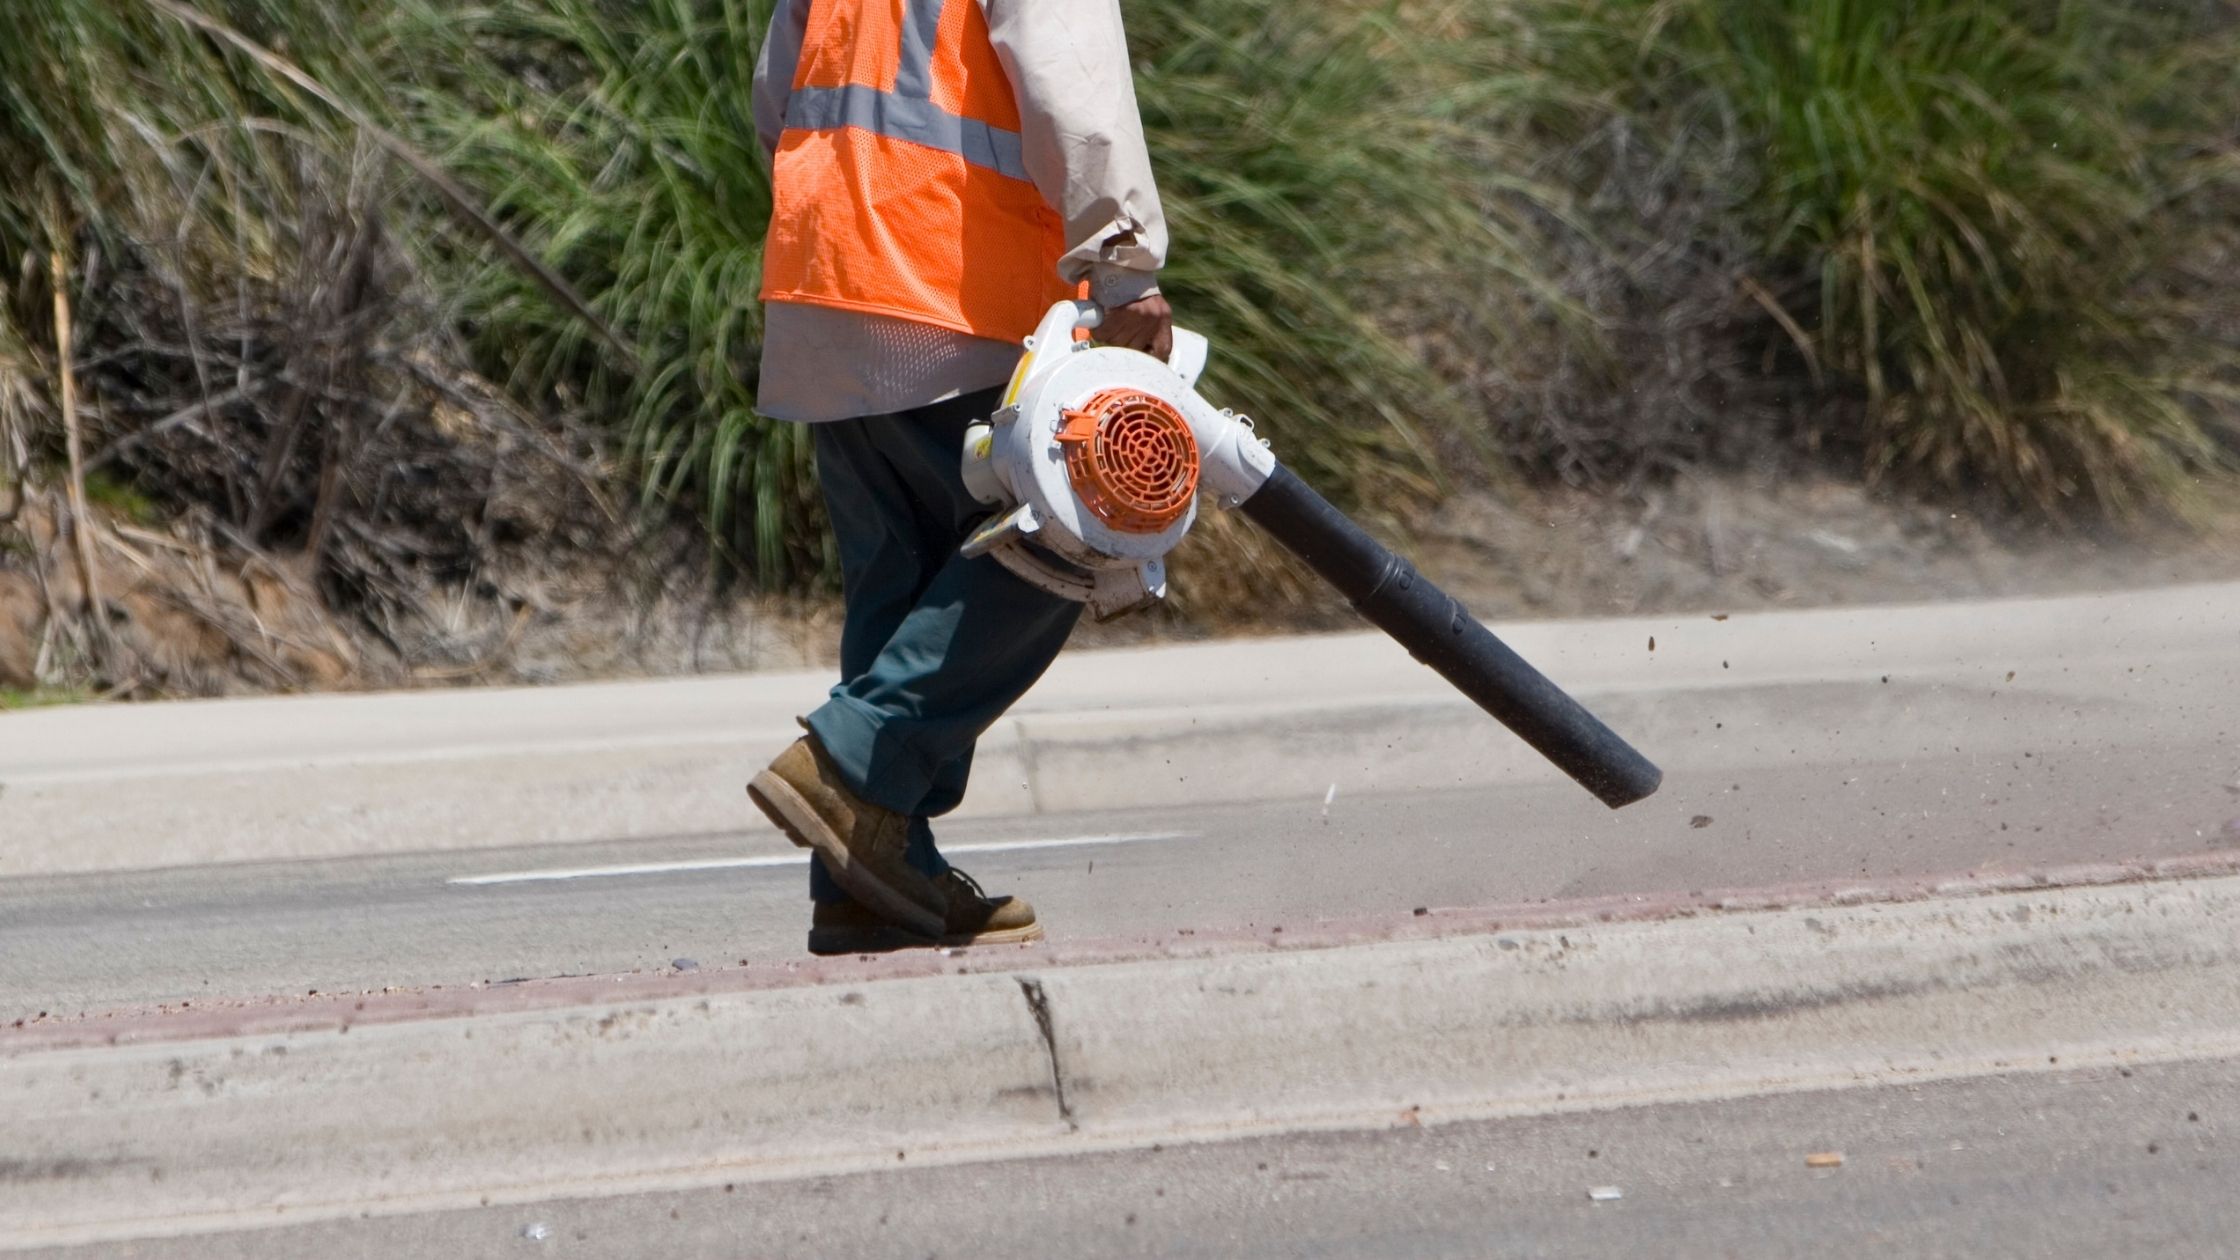 types of Leaf Blowers: Cordless Leaf Blowers